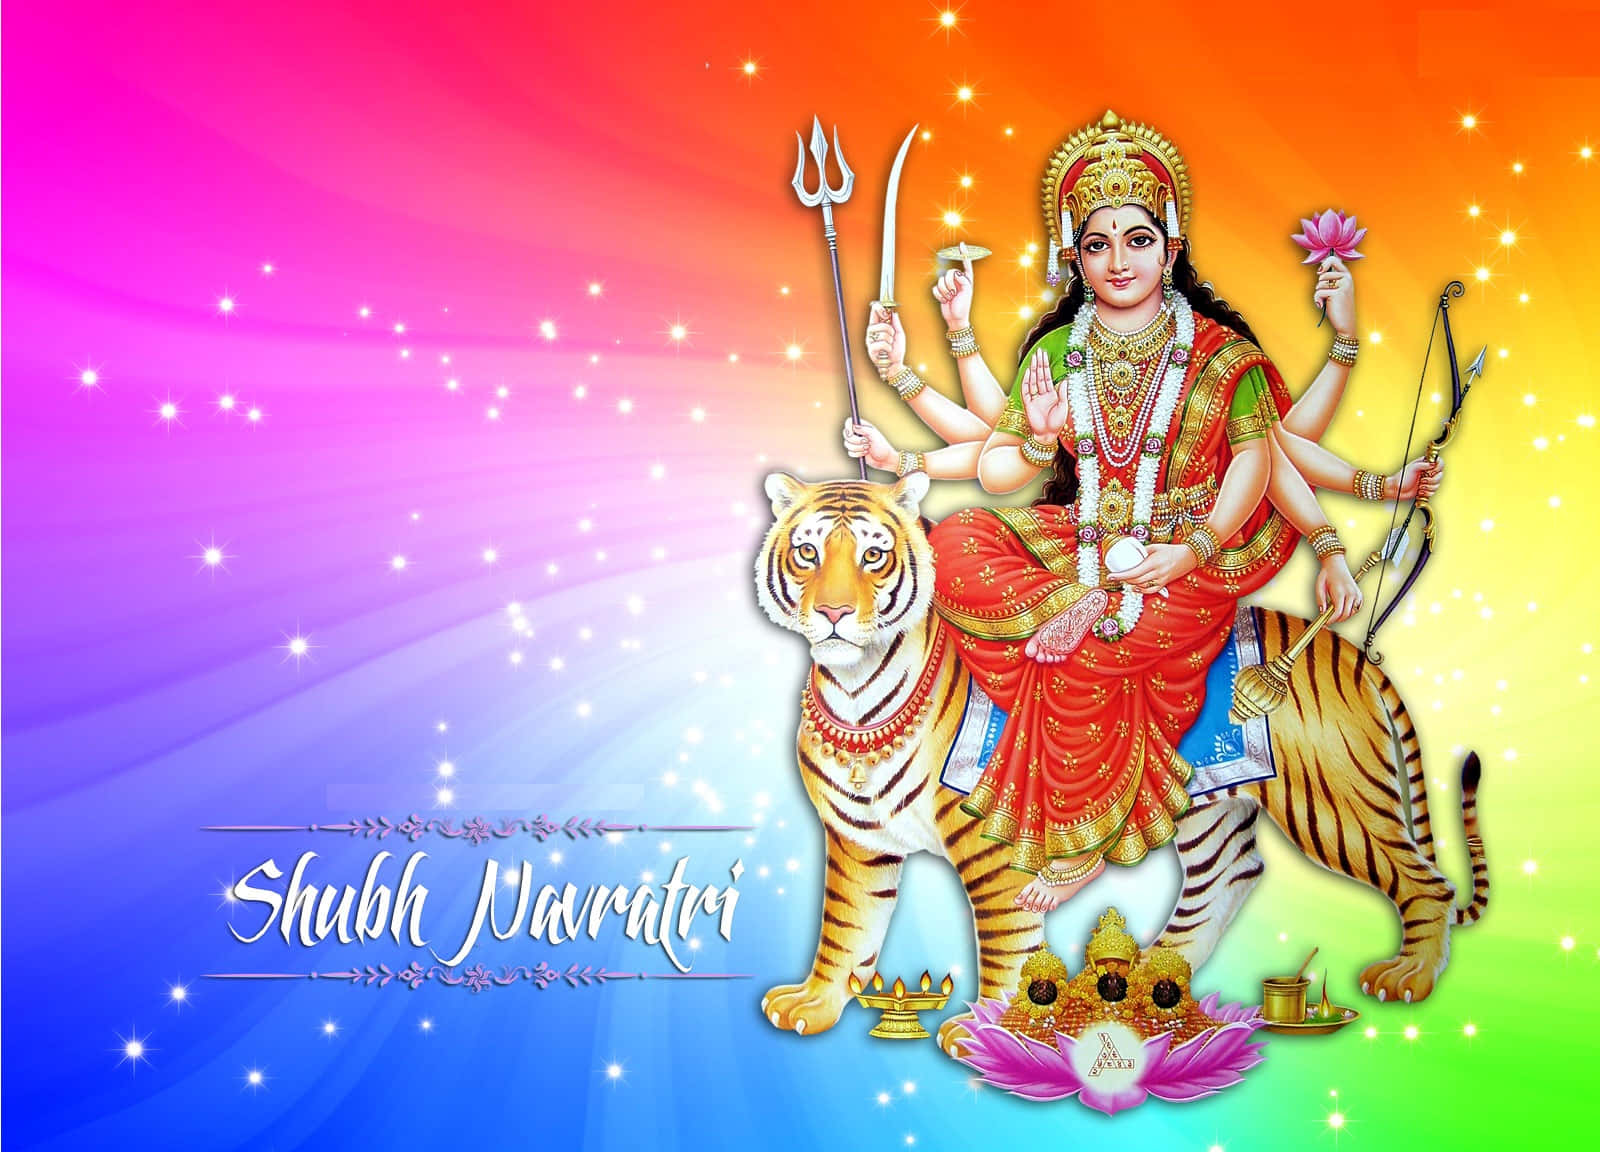 A Colorful Background With The Goddess Durga On It